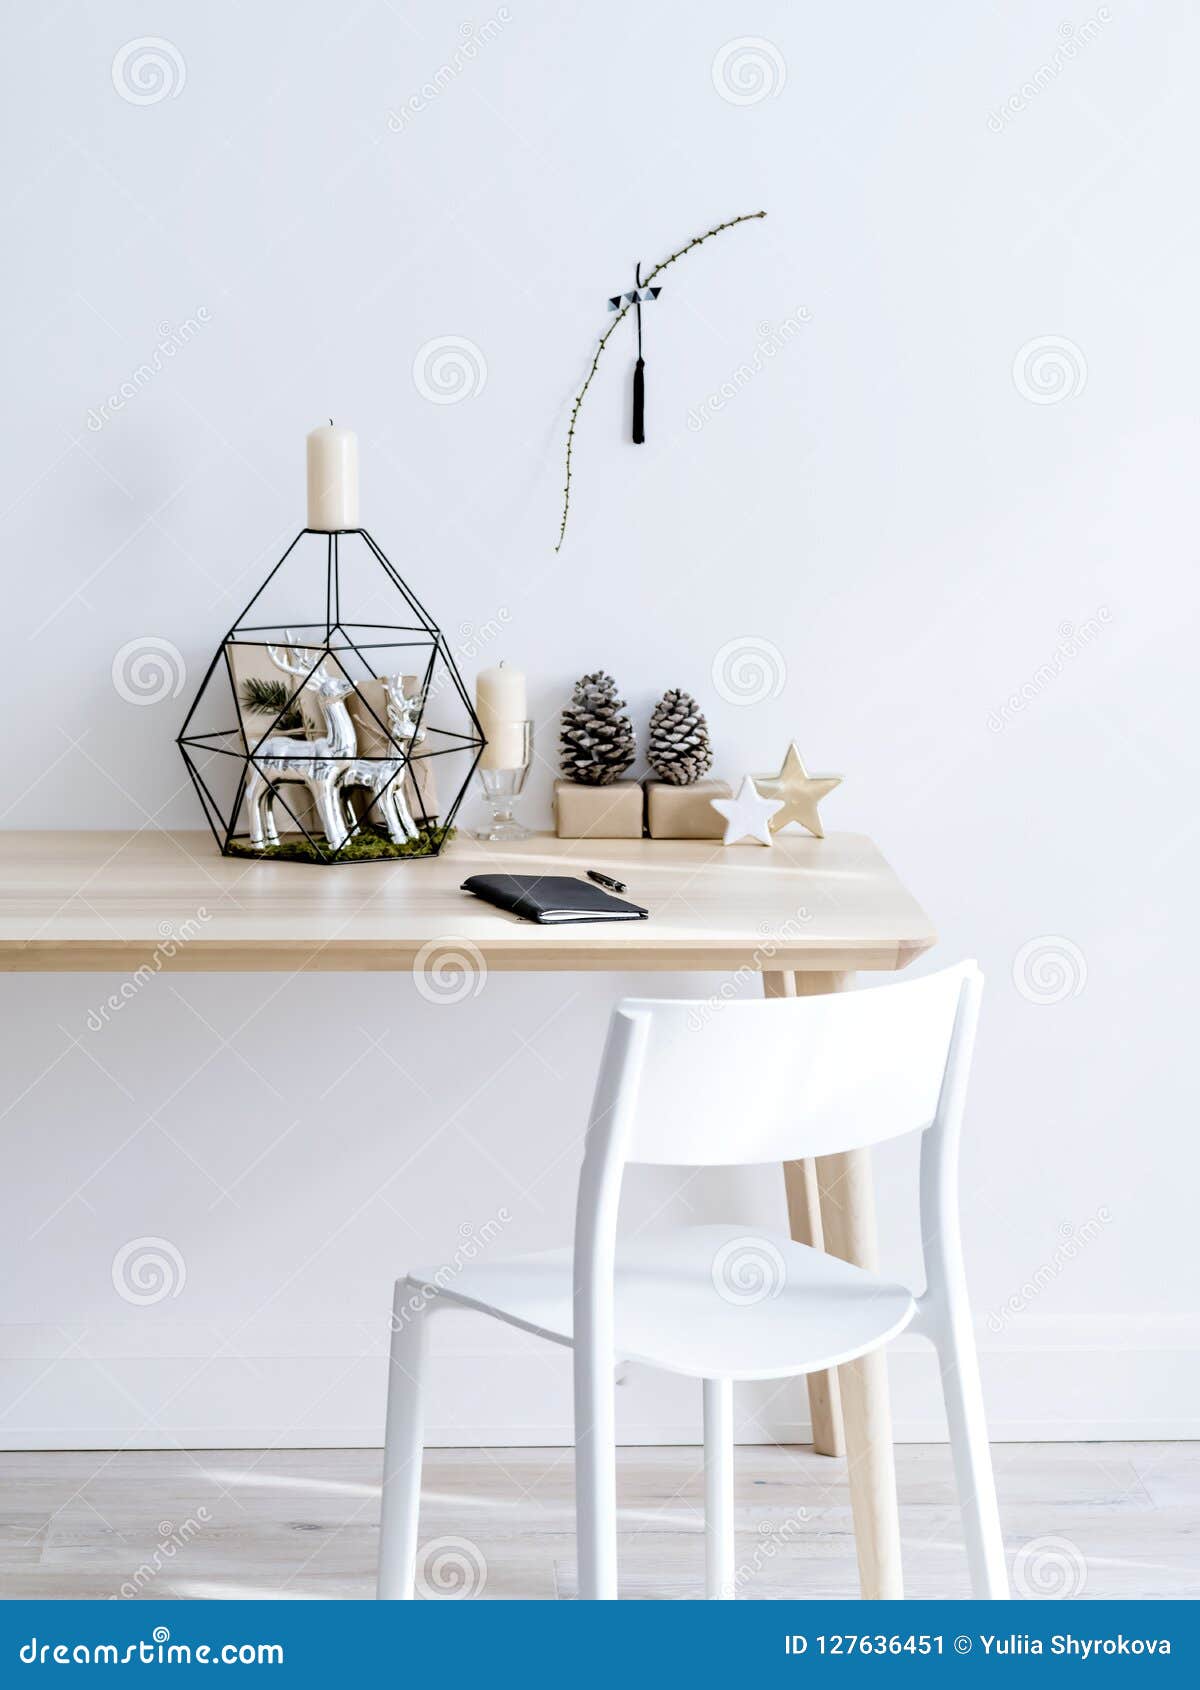 Workspace Decorated For Christmas Stock Image Image Of Lamp